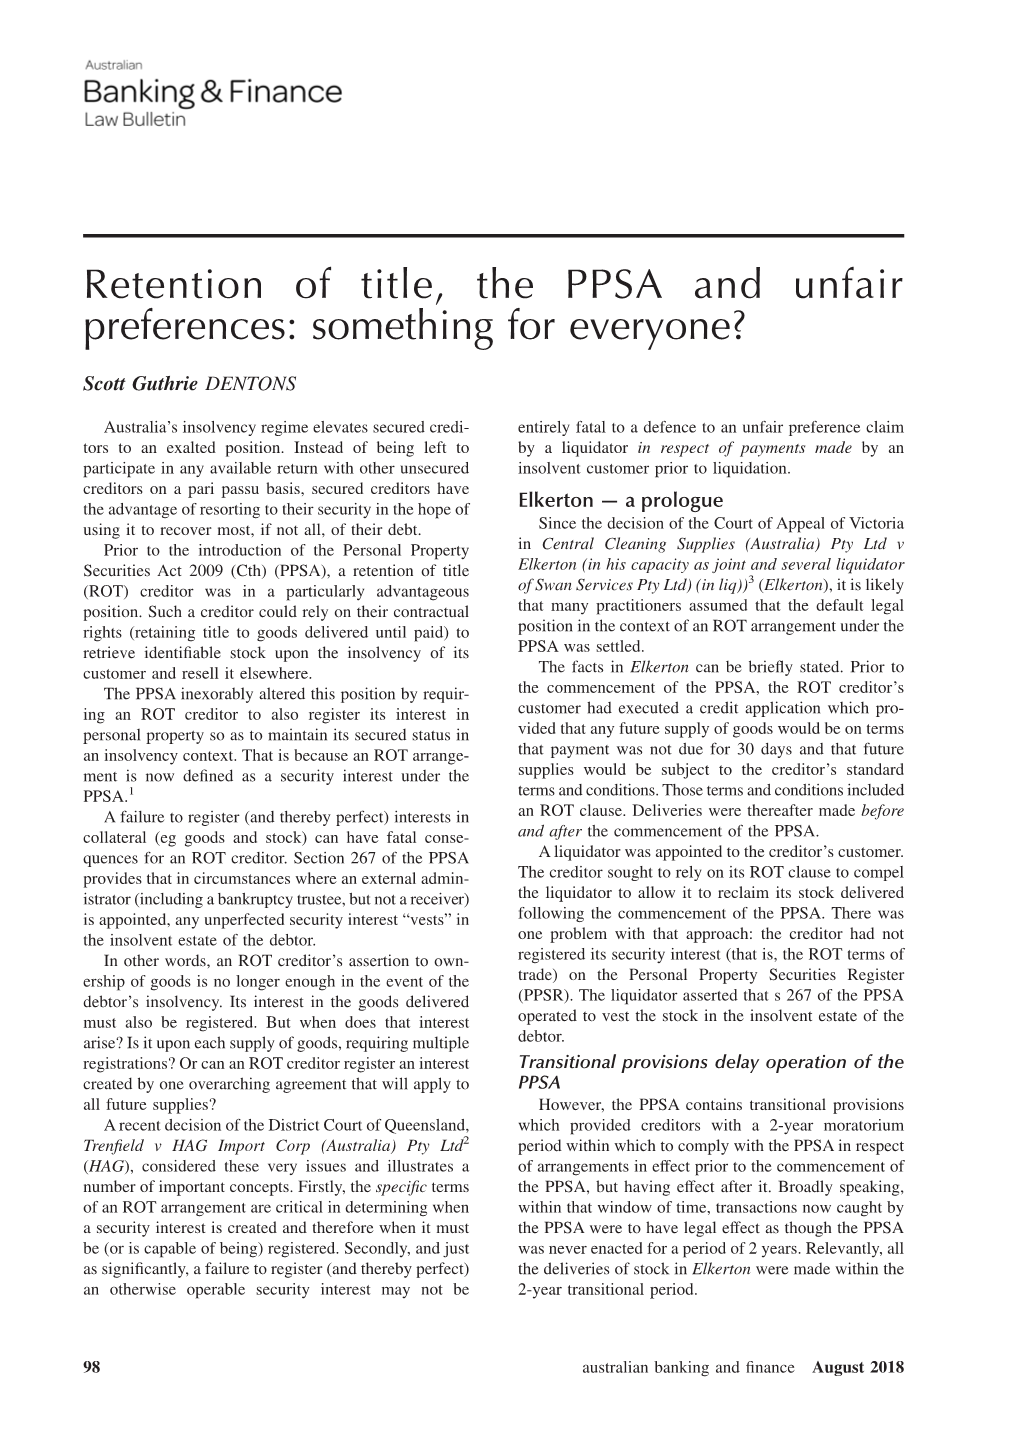 Retention of Title, the PPSA and Unfair Preferences: Something for Everyone?